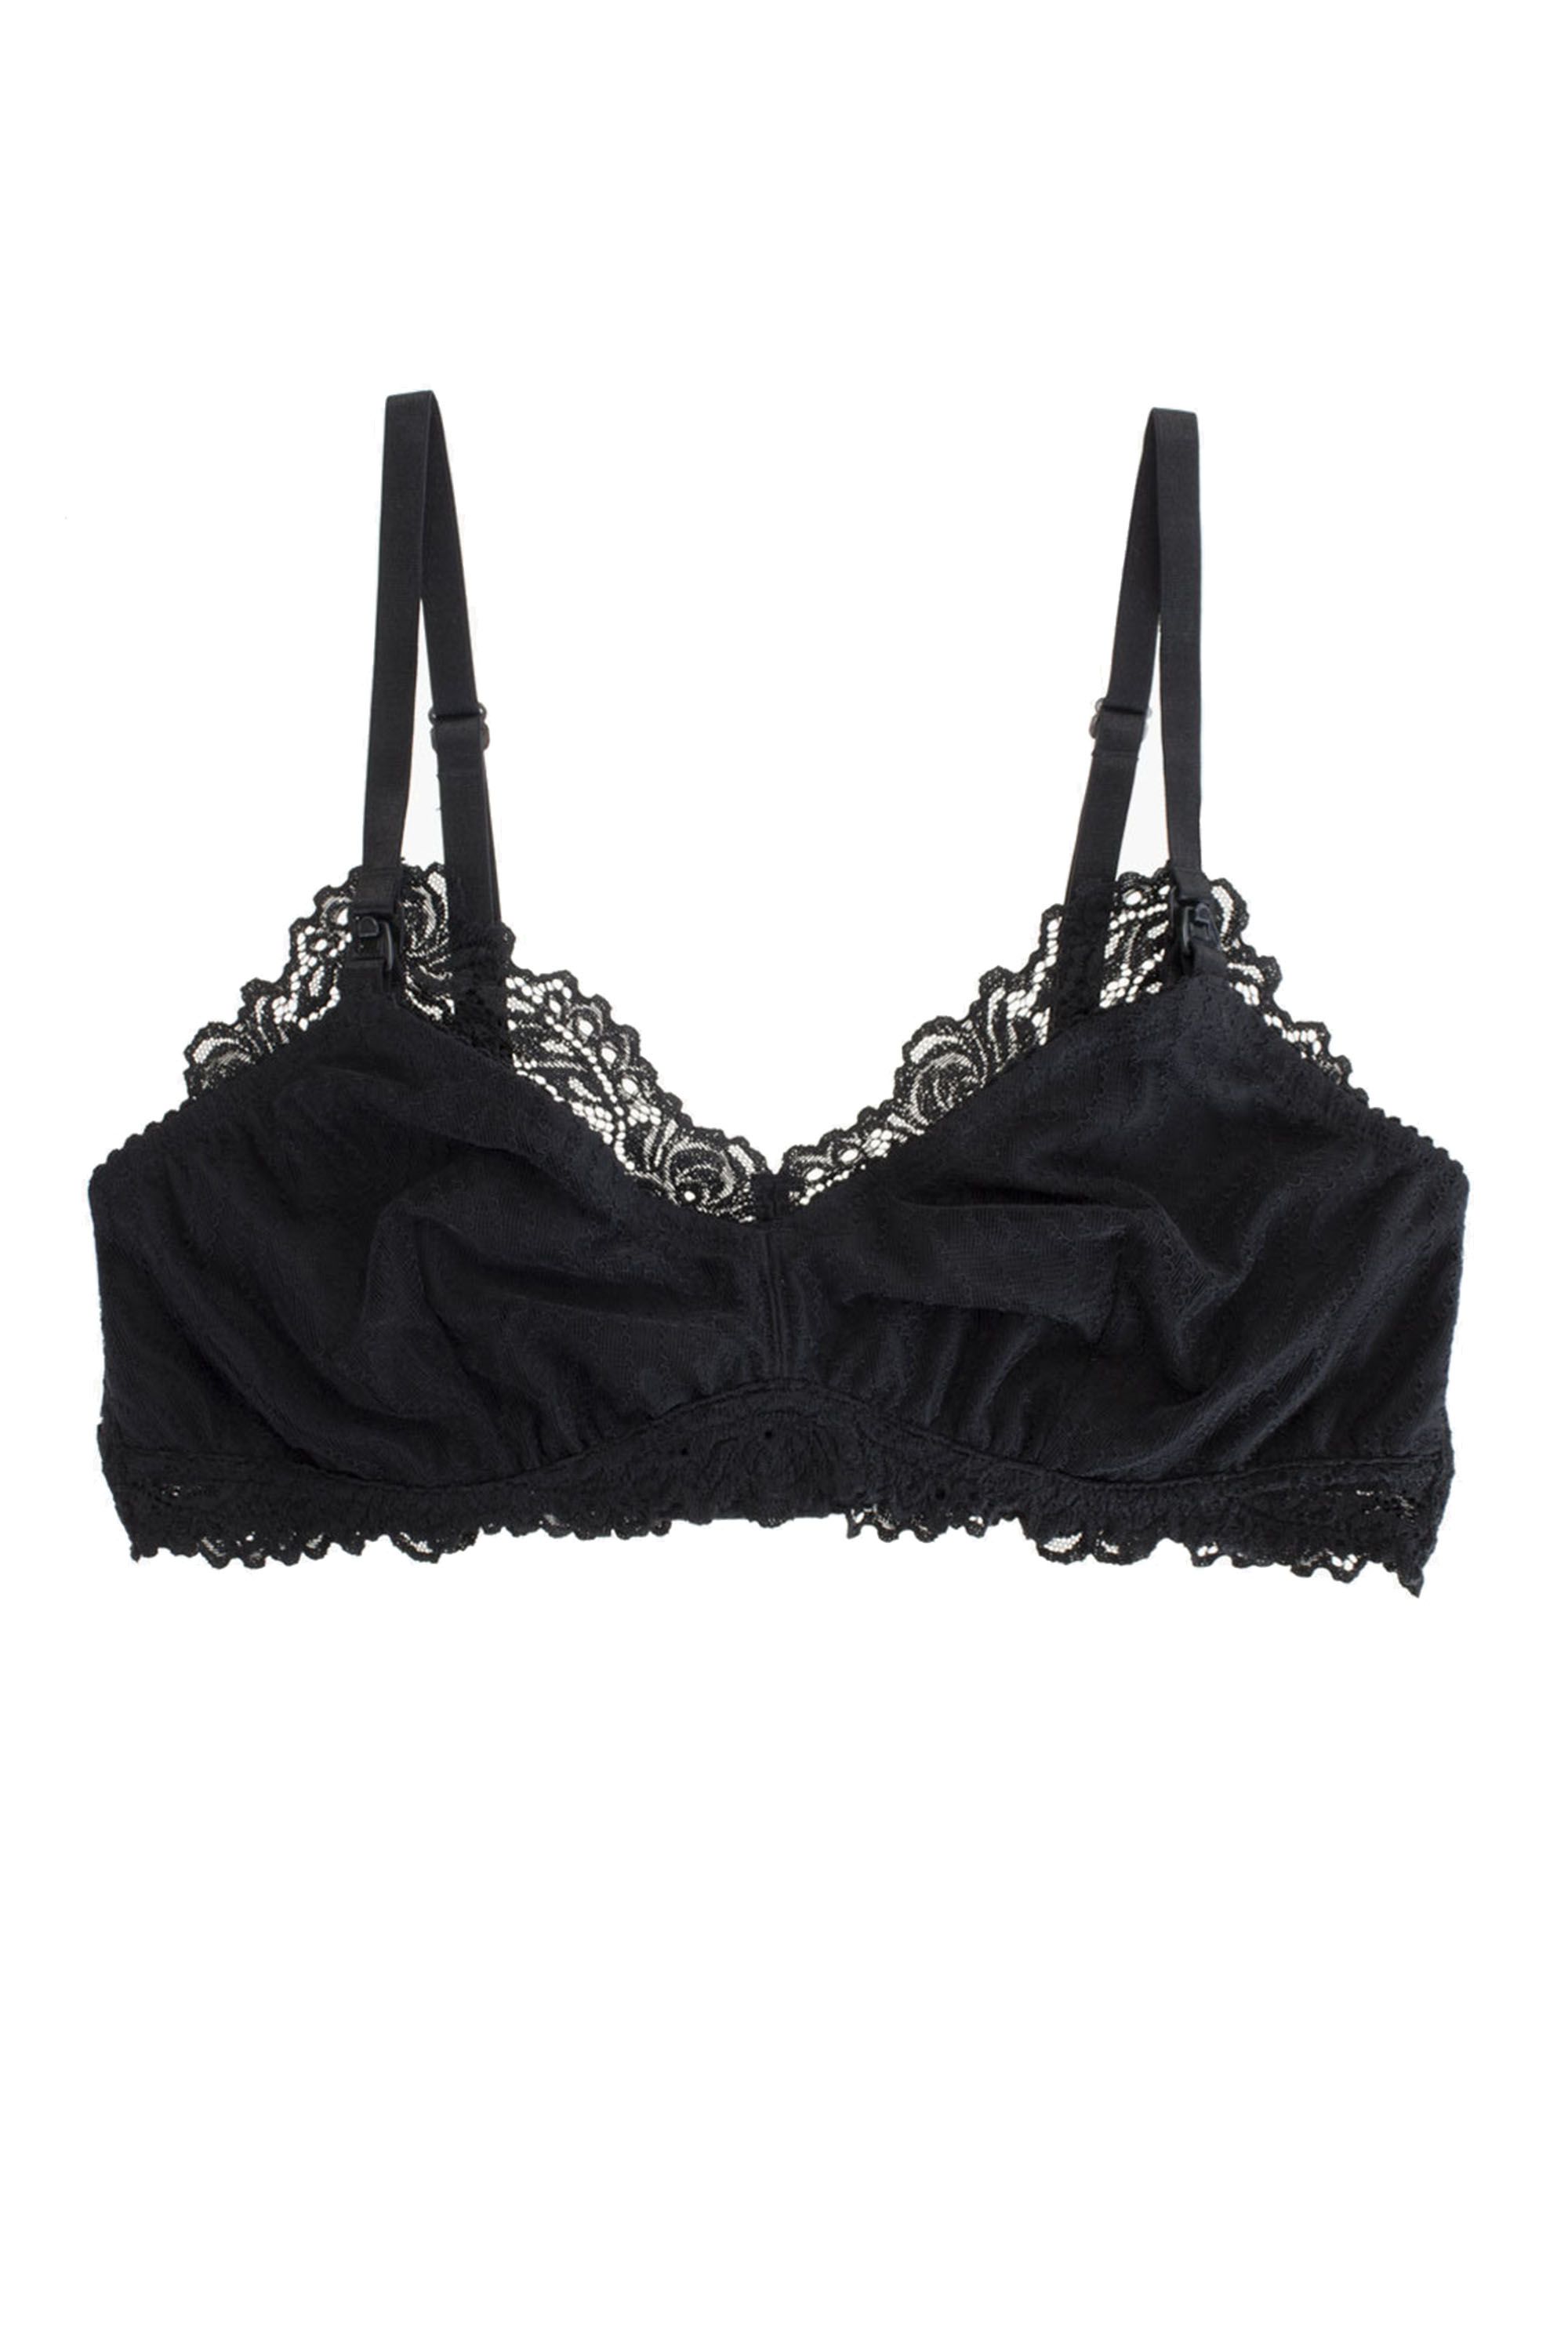 𝕵𝖆𝖎𝖒𝖎𝖊 † 𝕷𝖊𝖊𓃹 on Instagram: I will be first to admit it… I have  always been an underwire type of lady when it comes to bra shopping.  However! Honey Love has done